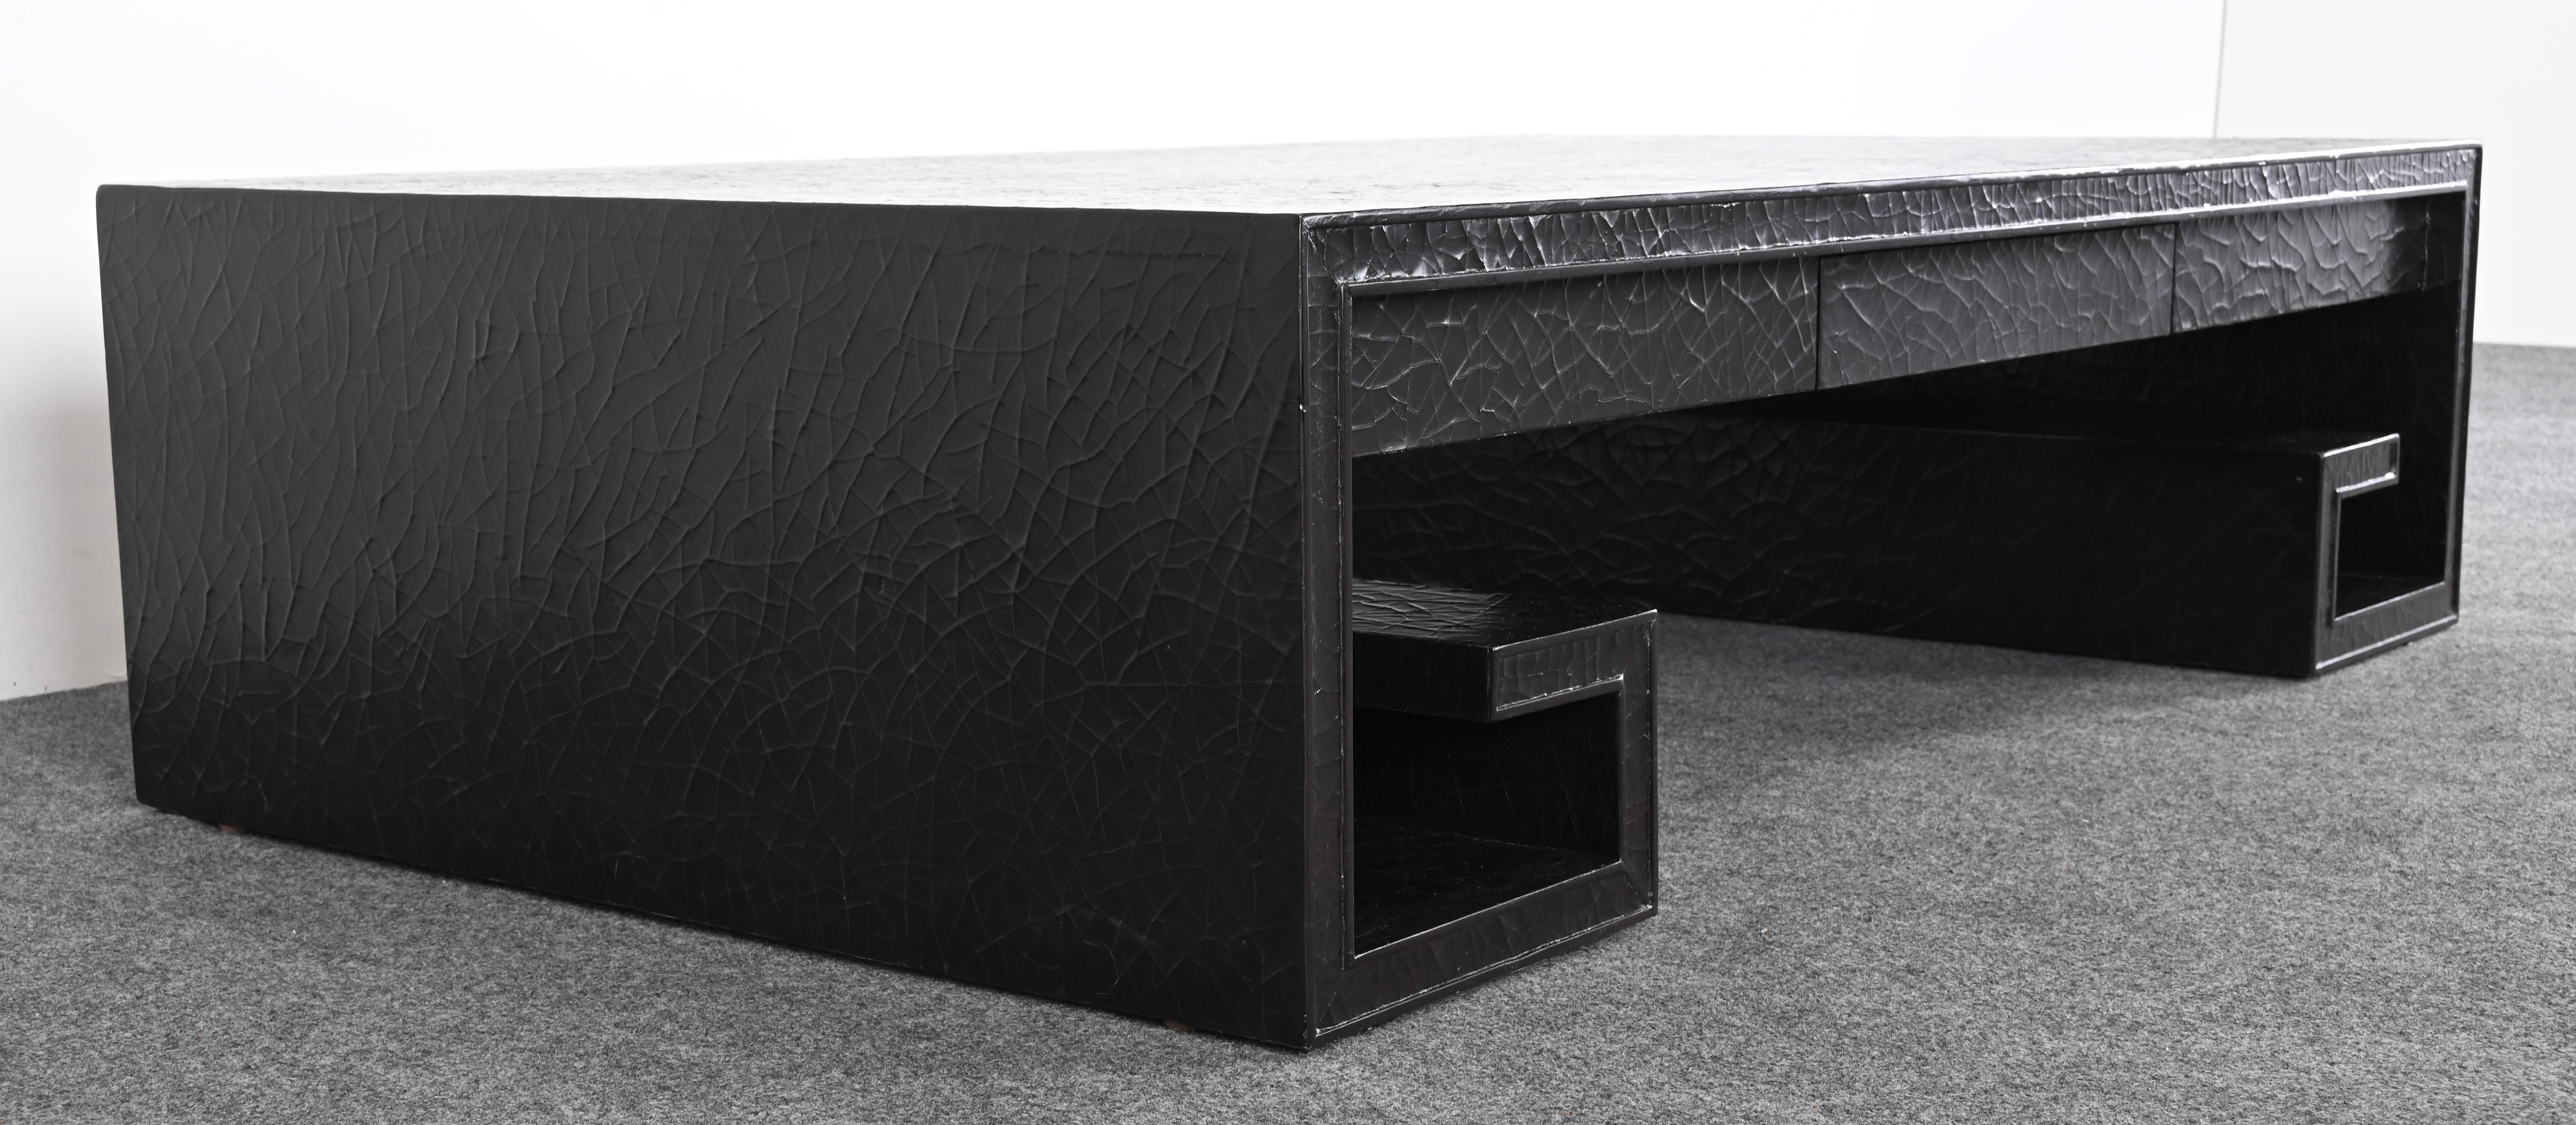 Monumental Coffee Table by Thomas Pheasant for Baker, 1990s 1